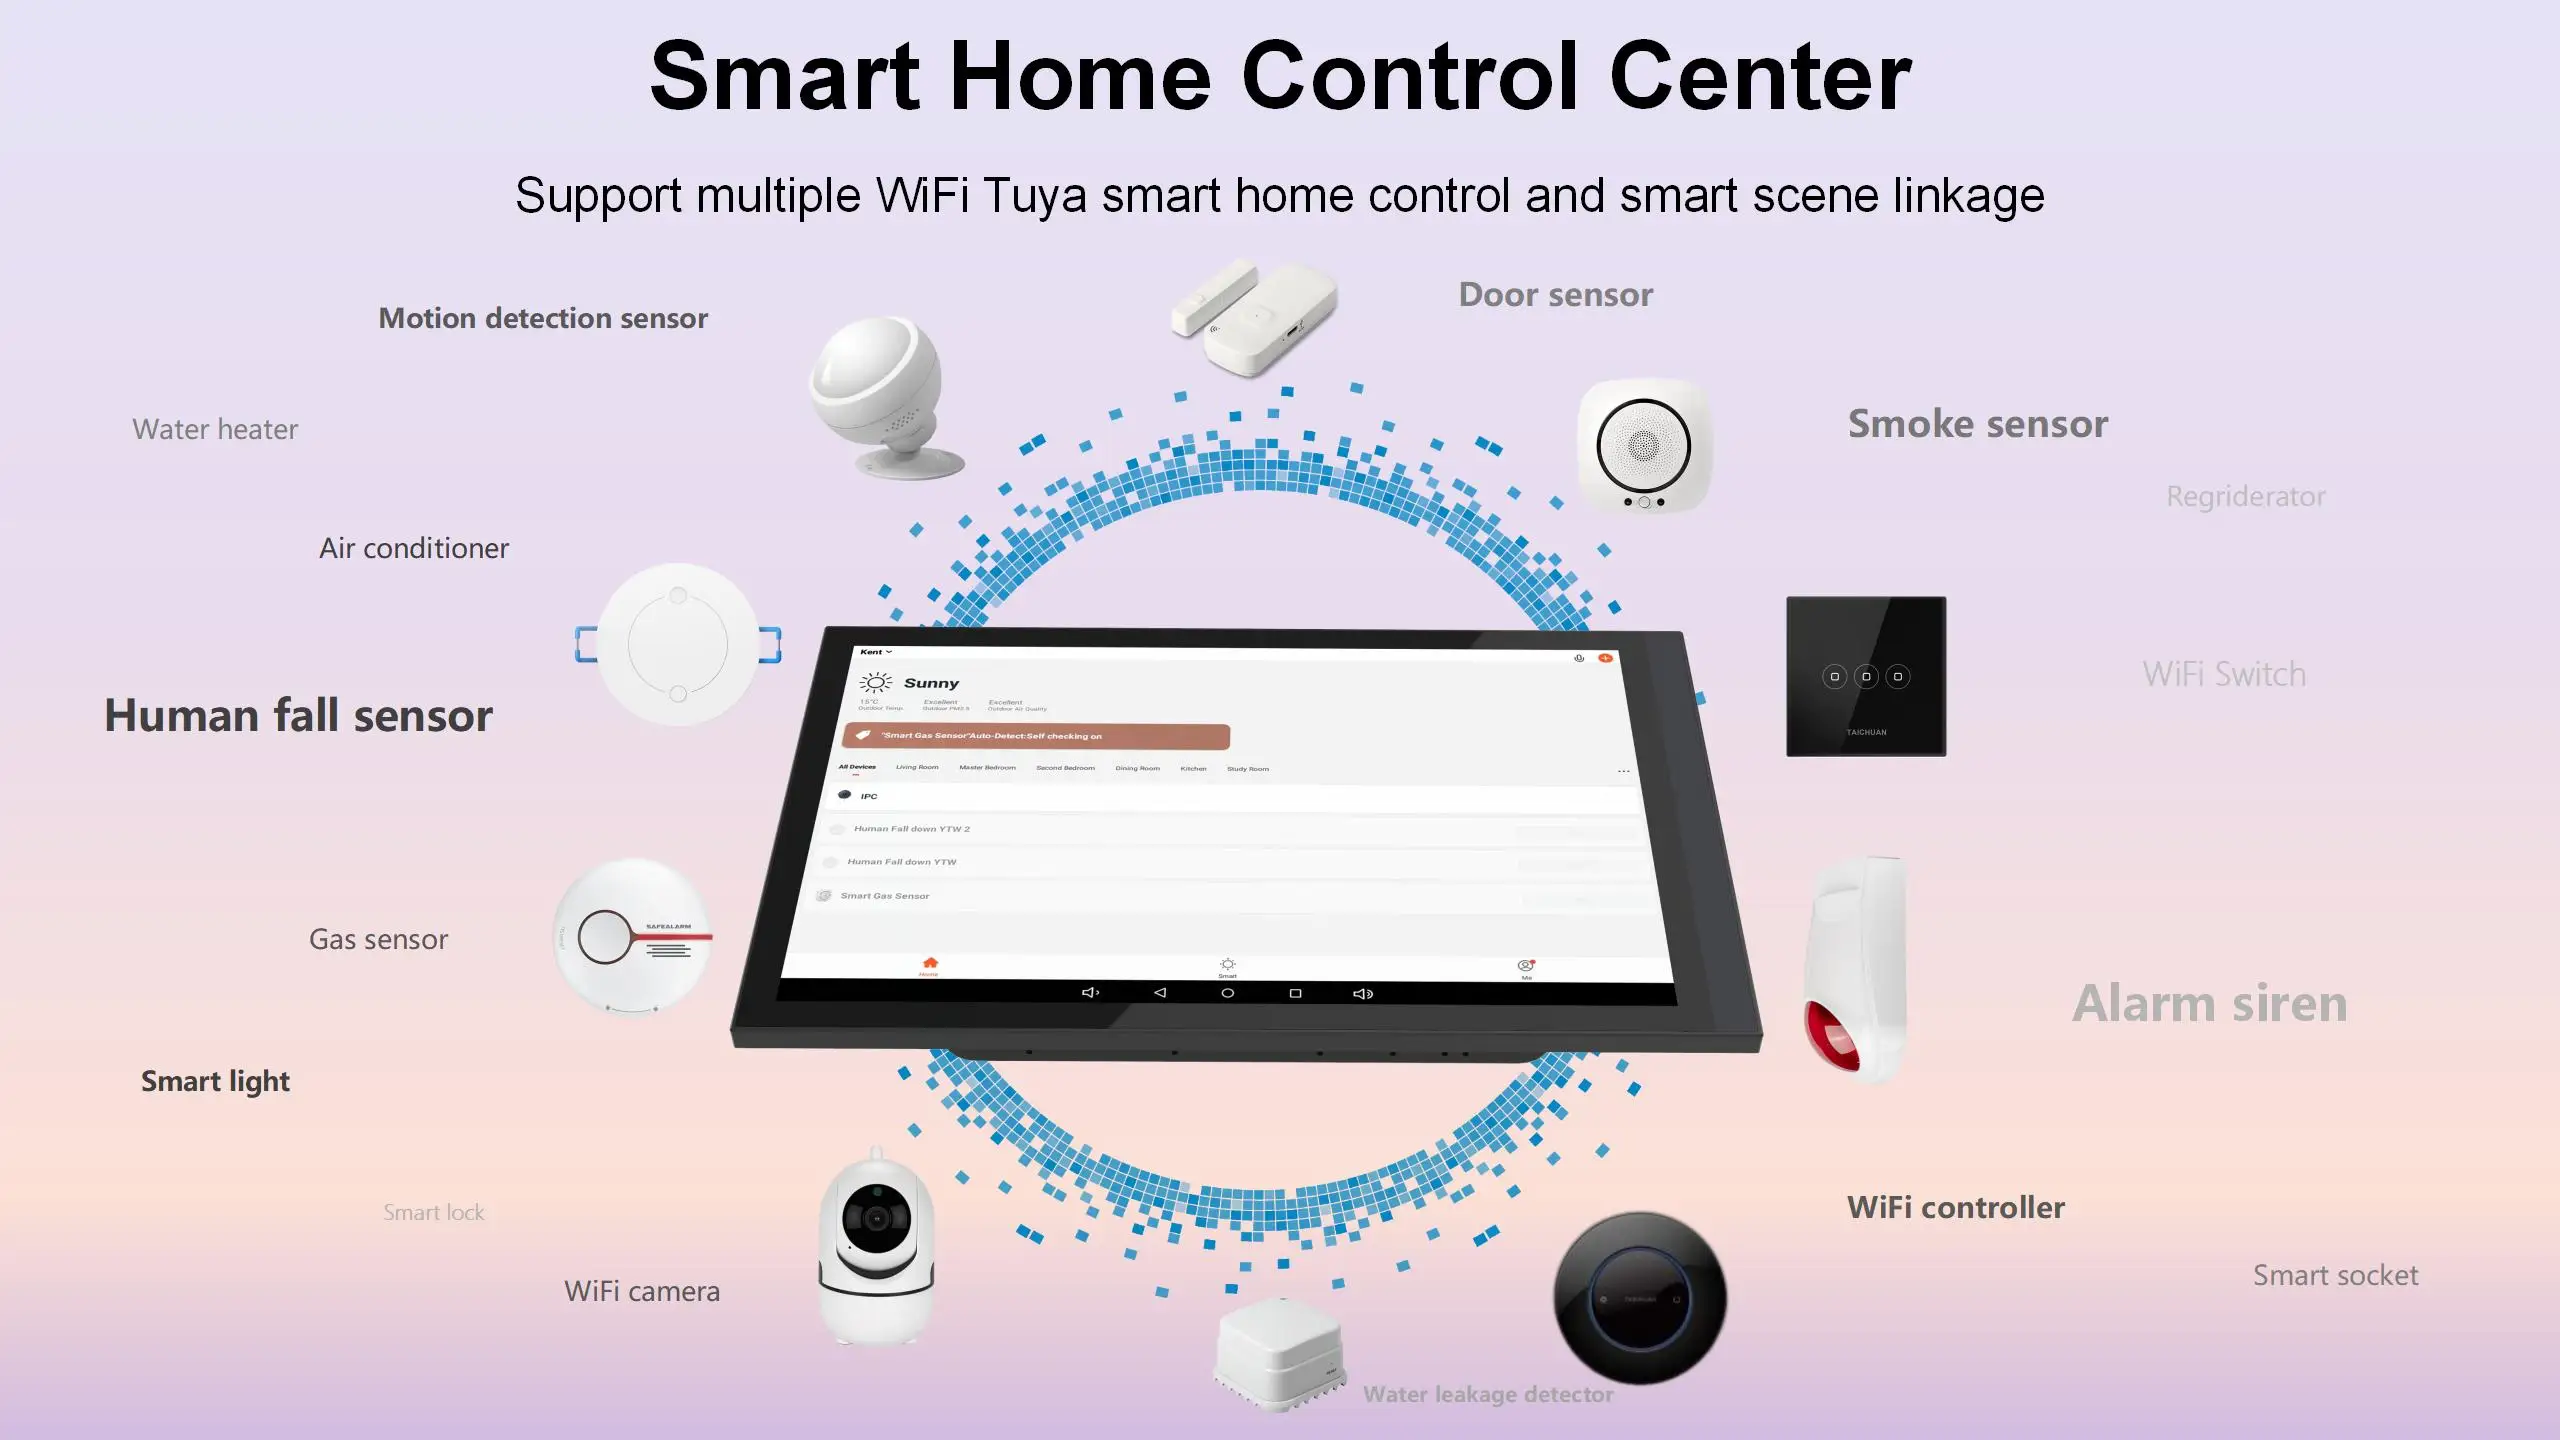 Android tablet with 2G RAM Tuya smart home control panel Alexa Home Automation Wall Control screen Smartlife Smart Display enlarge